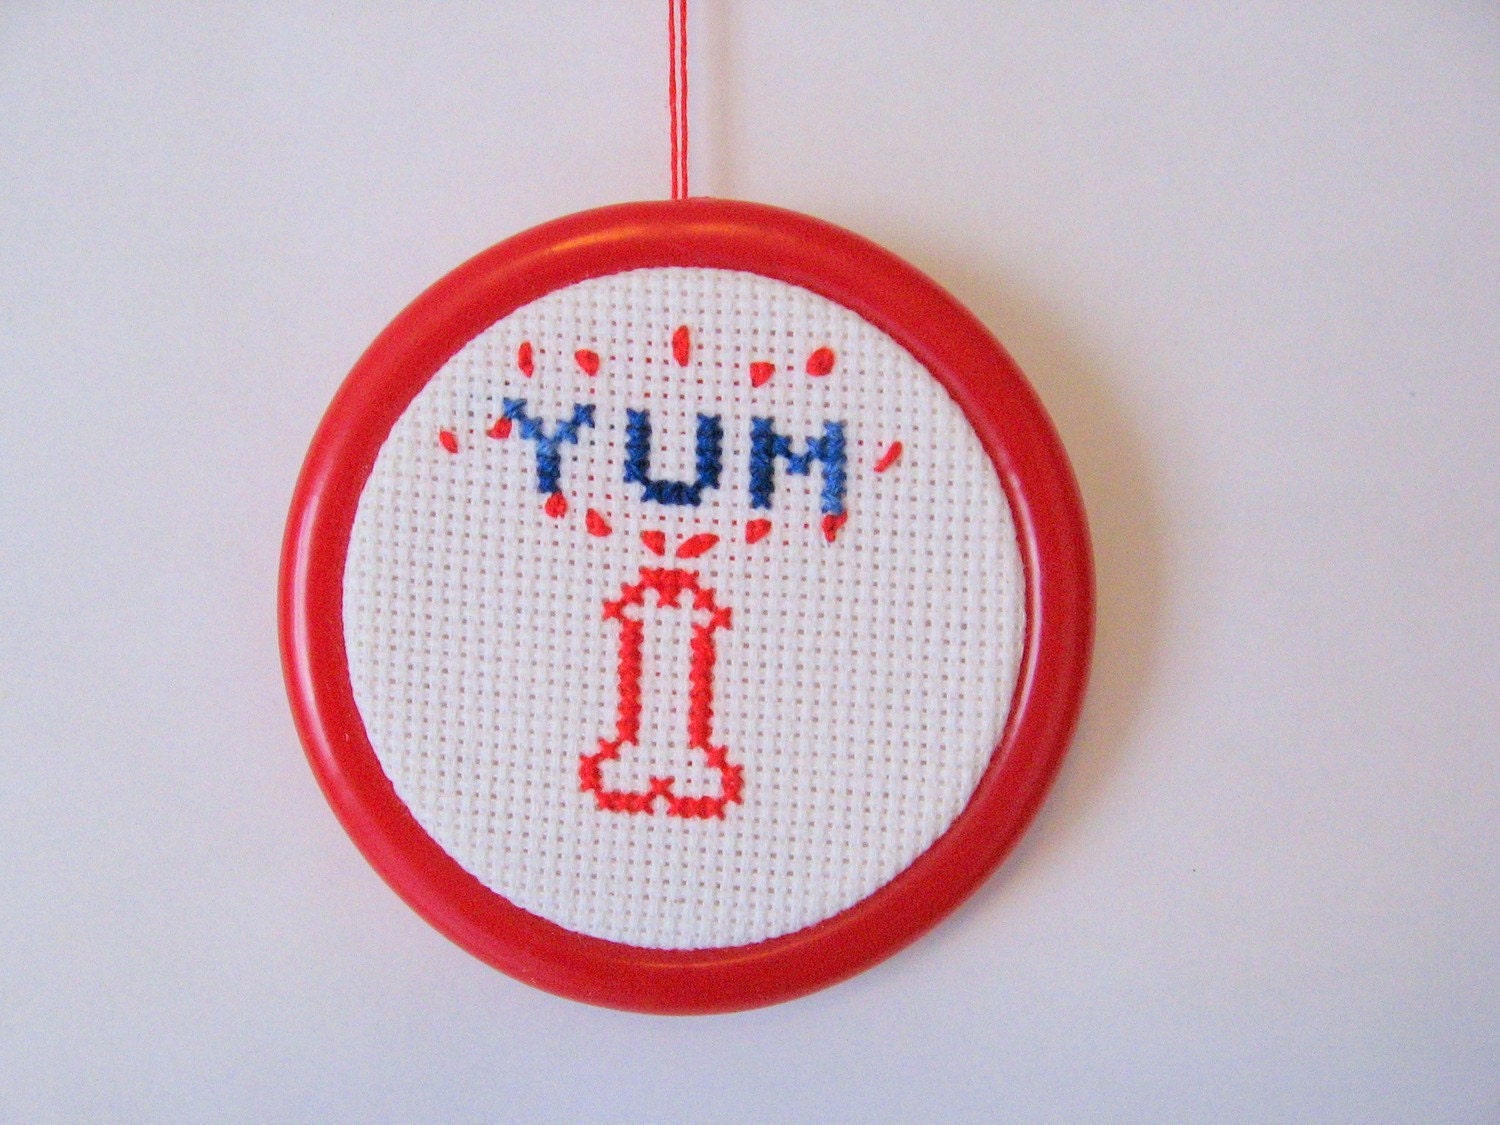 Yum Penis Cross Stitch Ornament By Maryvannote On Etsy